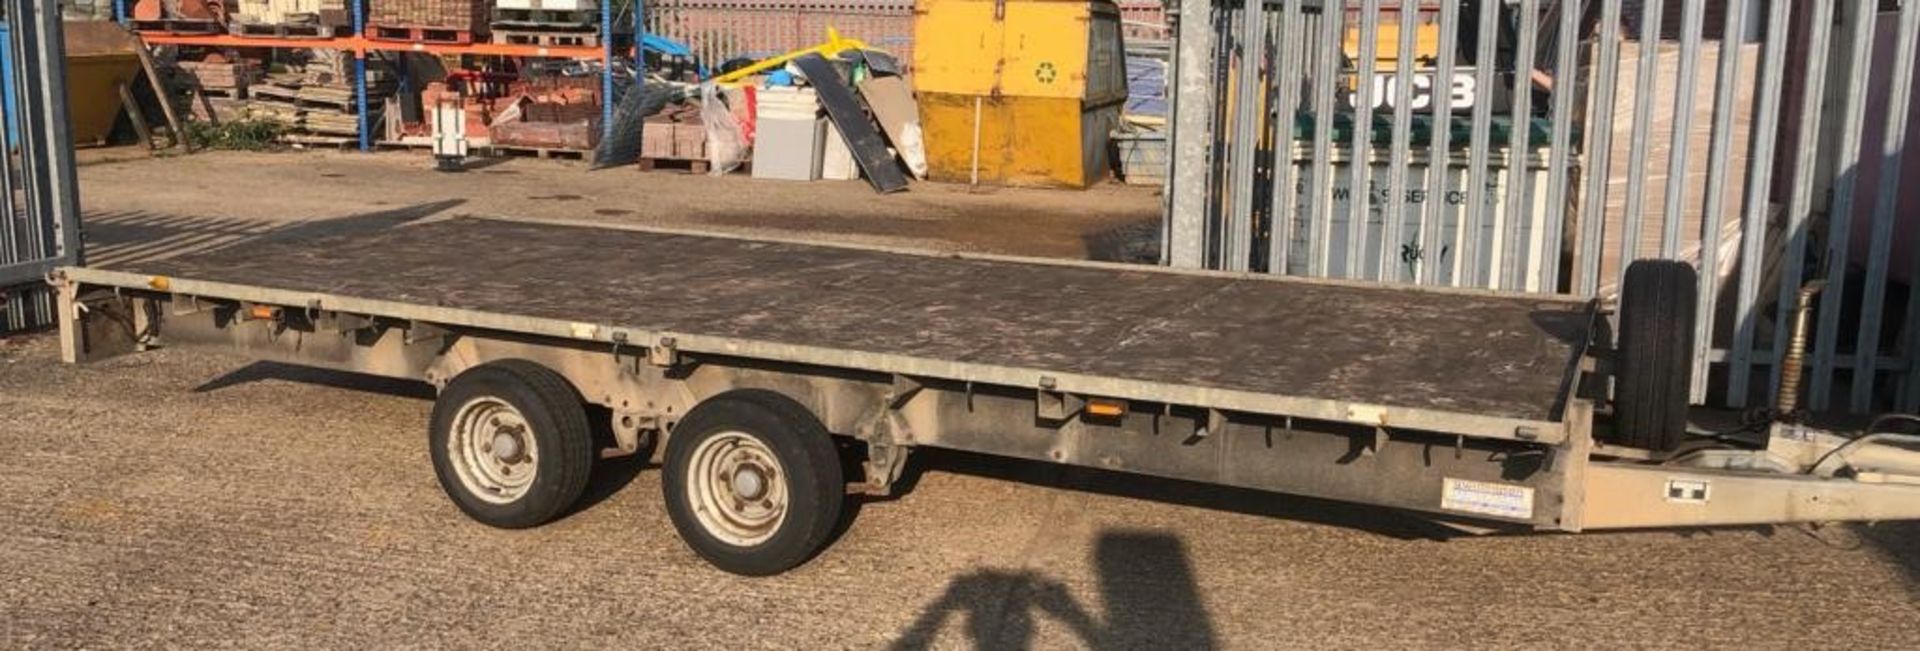 1 x Ifor Williams LM166G 3500kg Flatbed Plant Low Loader Trailer - 16 x 6 ft - Twin Axle - CL027 -